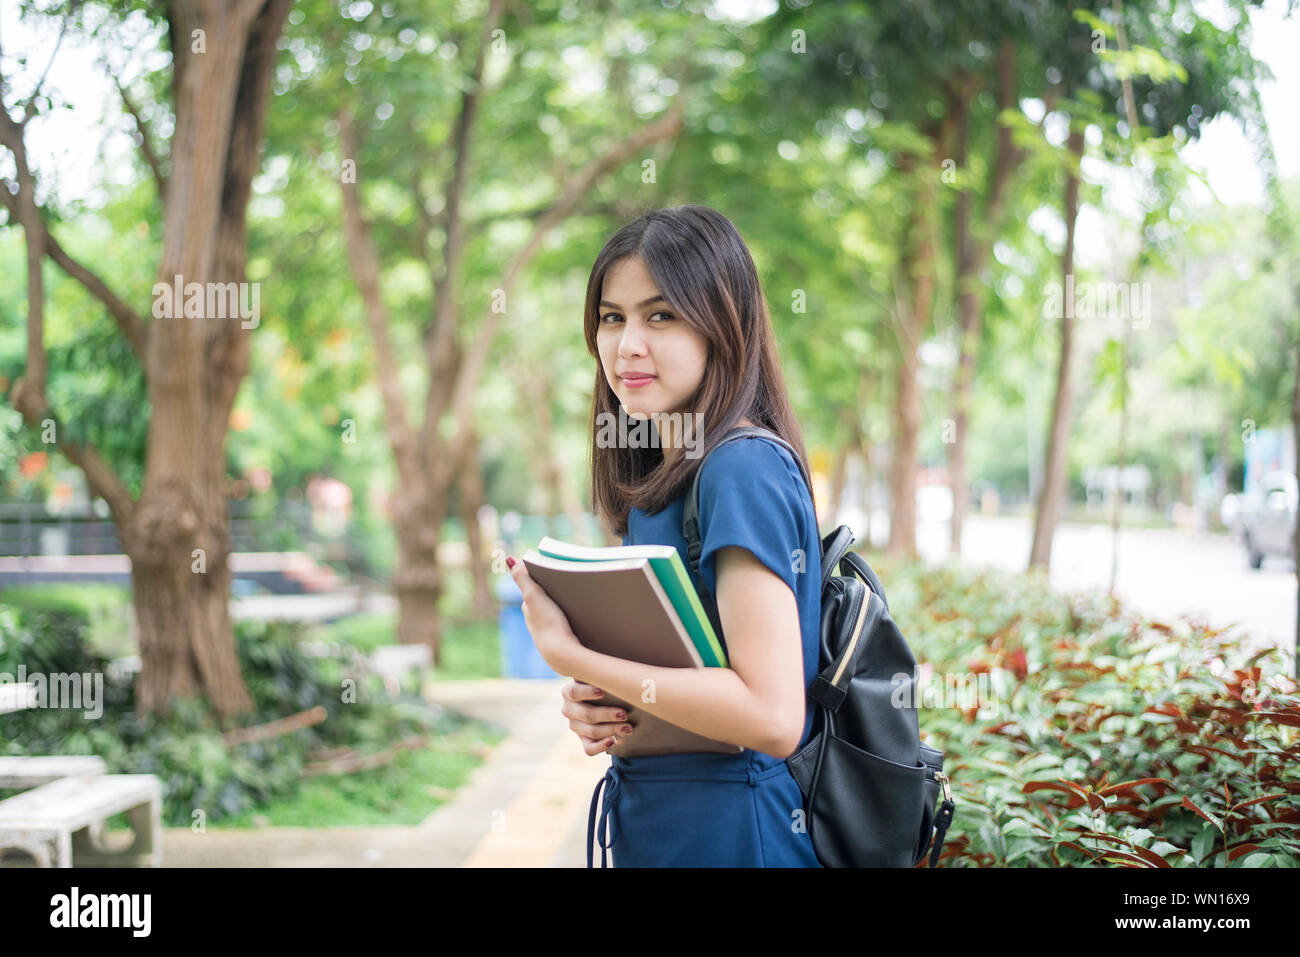 Portrait Of Smiling University Student In Campus Stock Photo